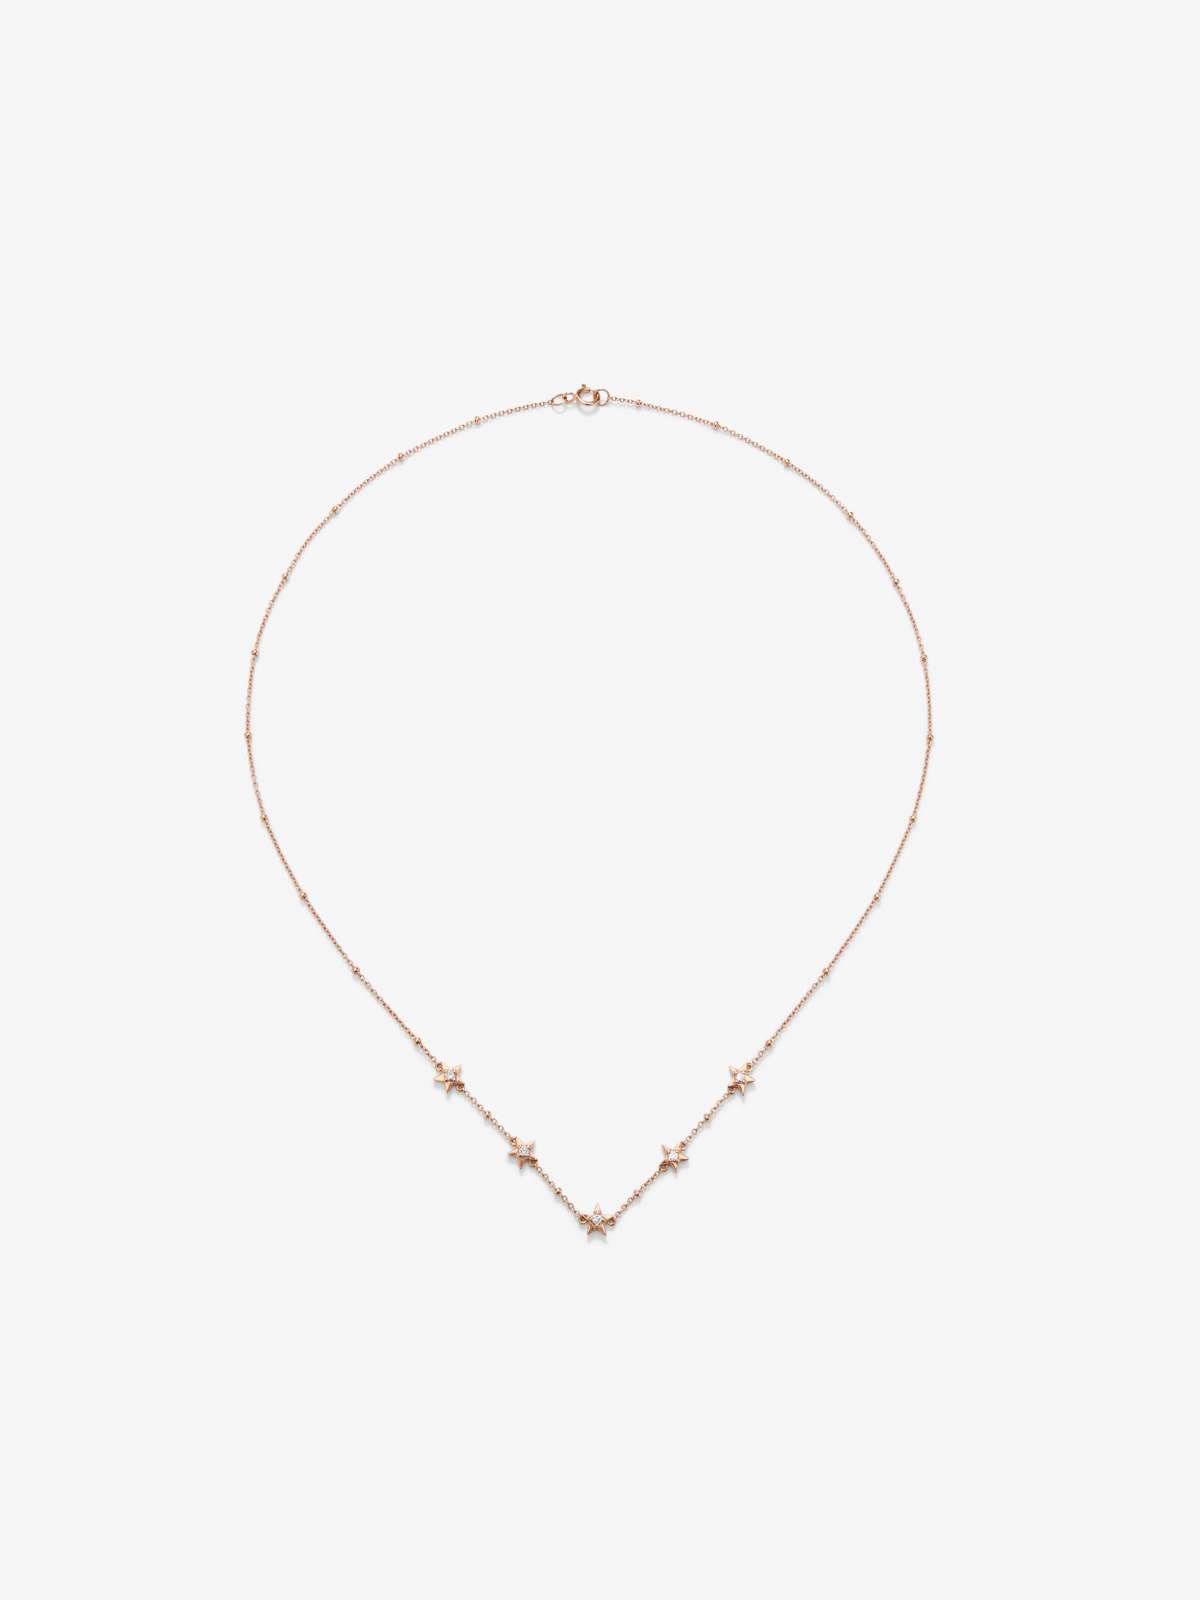 18kt Rose gold star pendant with diamonds